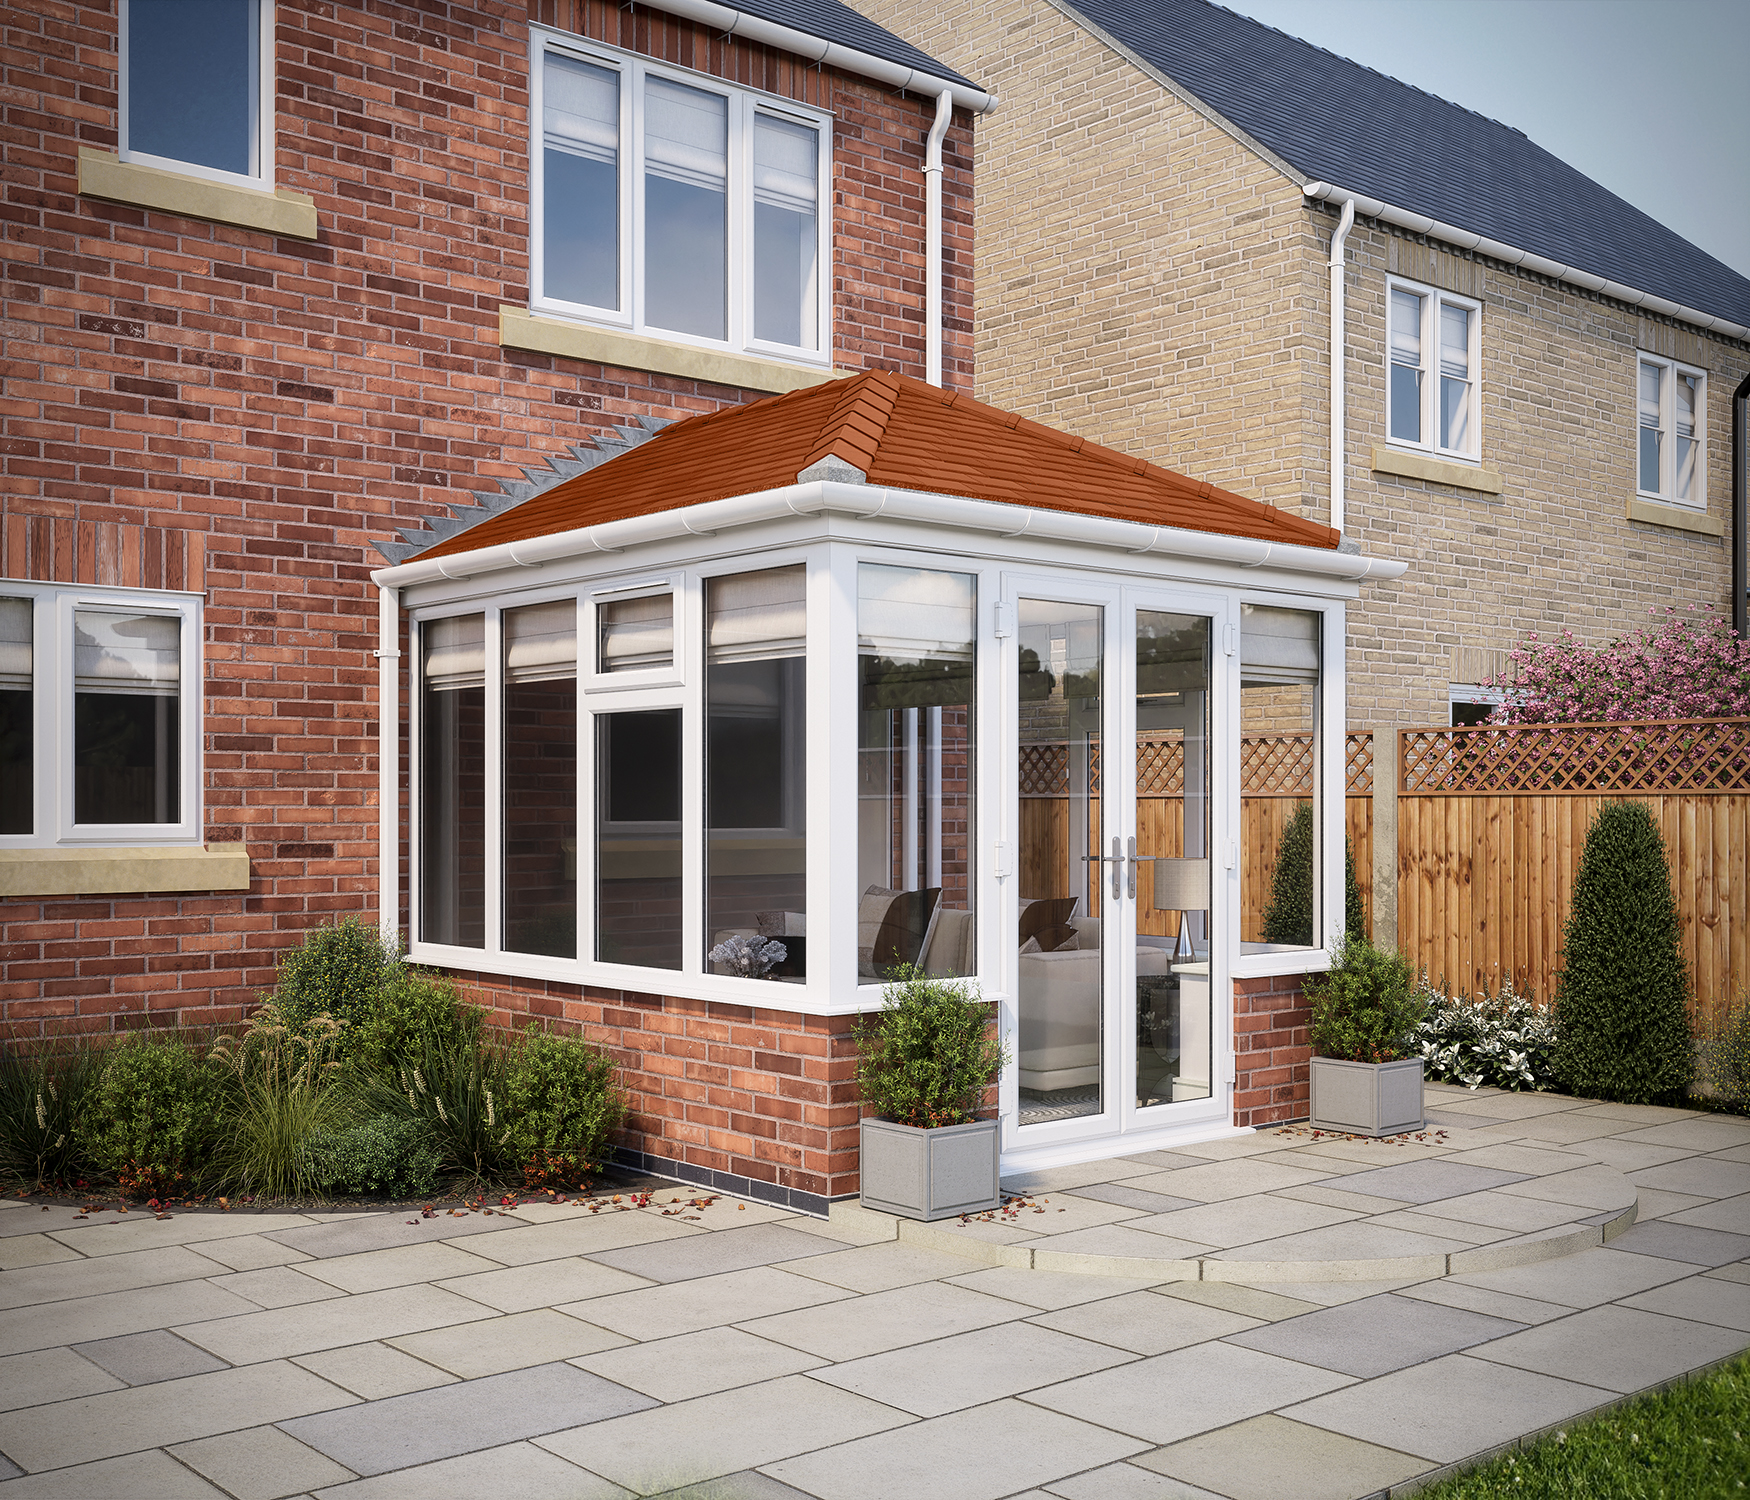 SOLid Roof Edwardian Conservatory White Frames Dwarf Wall with Rustic Terracotta Tiles - 13 x 13ft